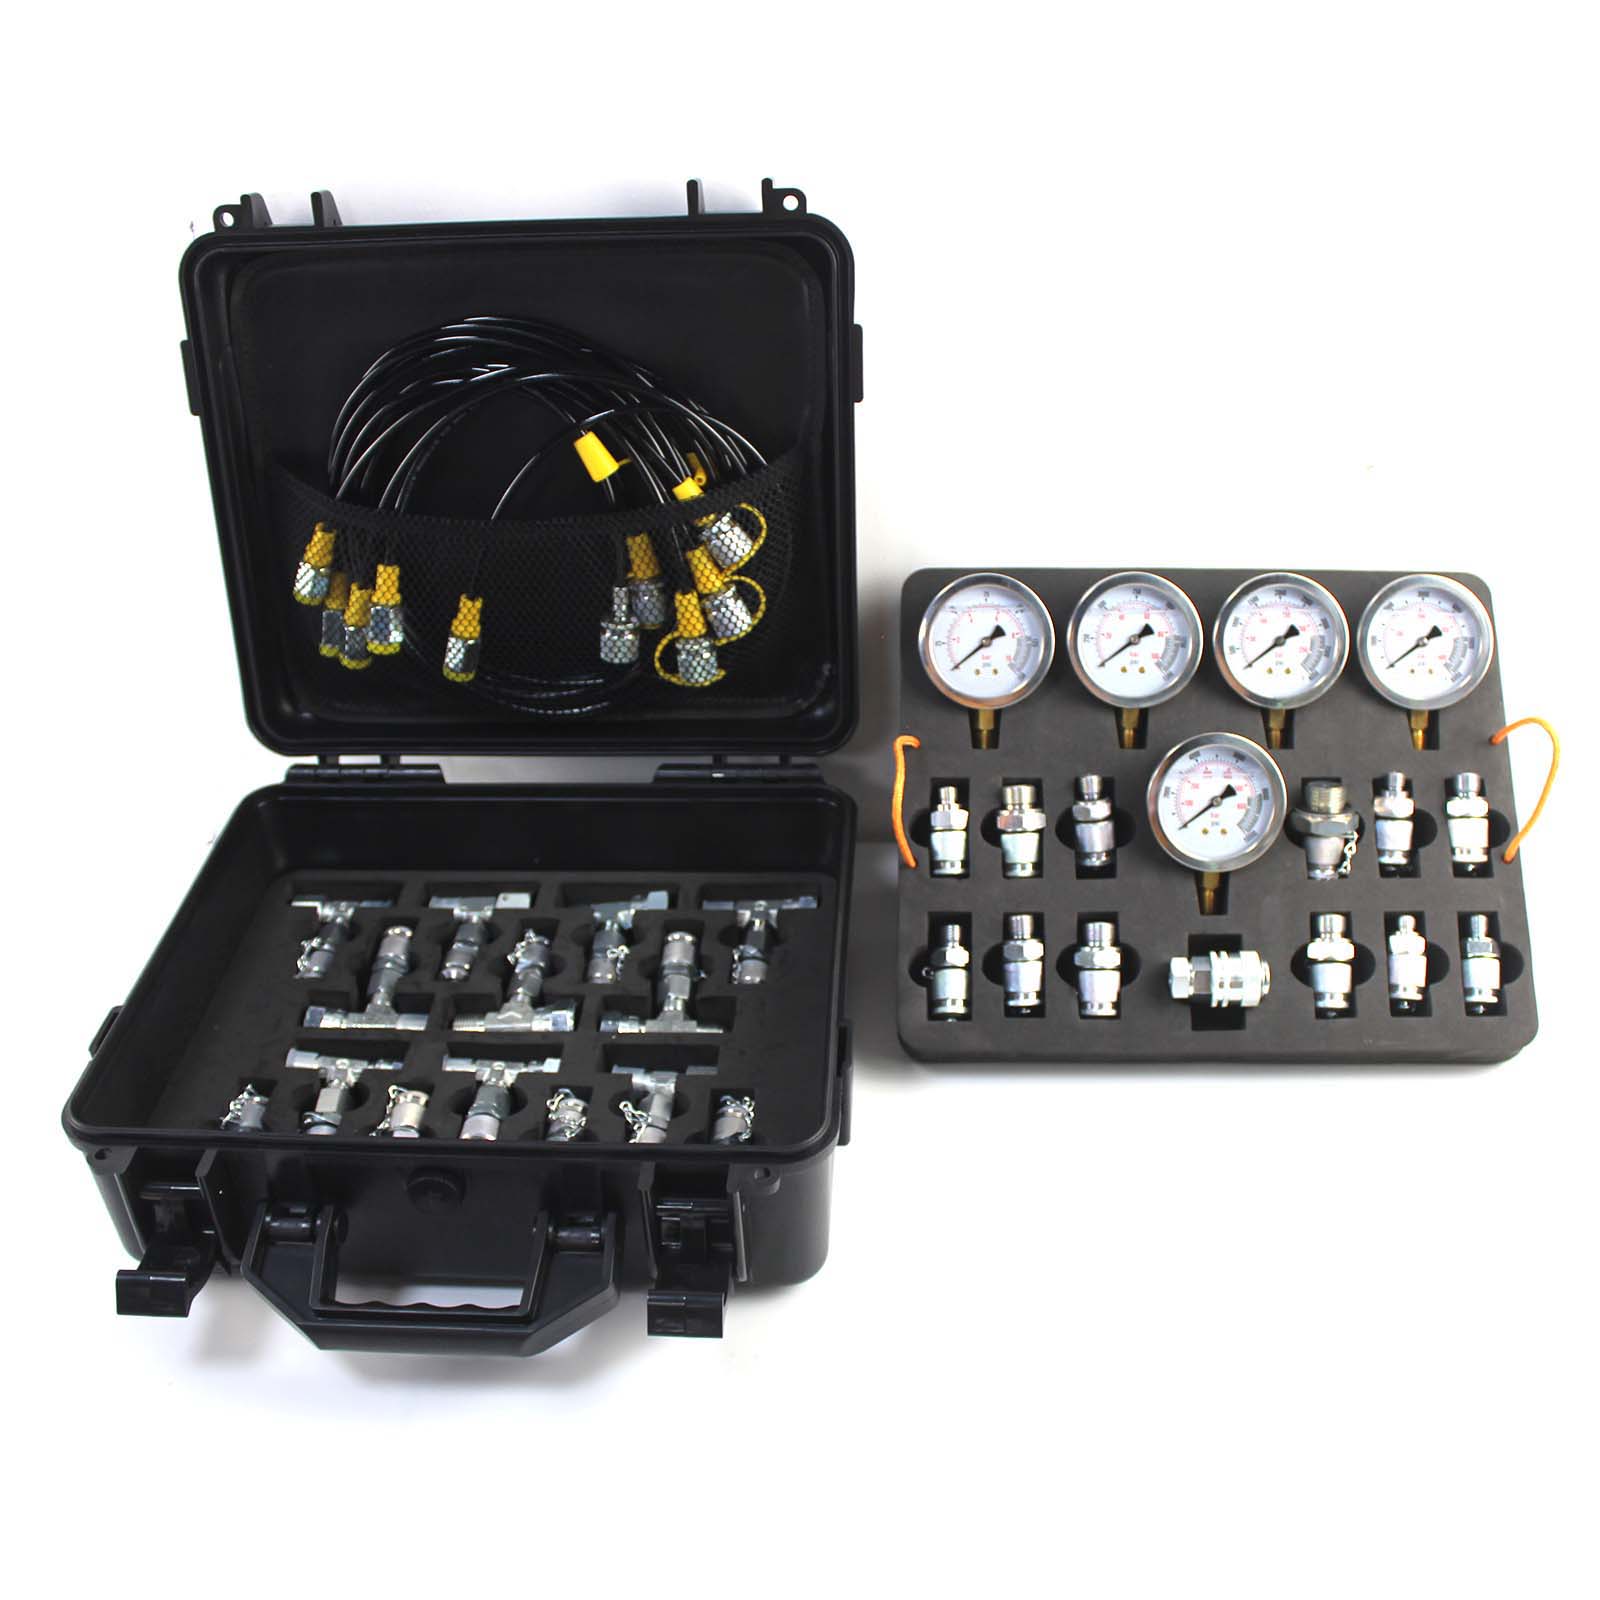 5 Gauges Double Layer Hydraulic Pressure Test Kit 13 Coupling 14 Tee Fittings Free Shipping